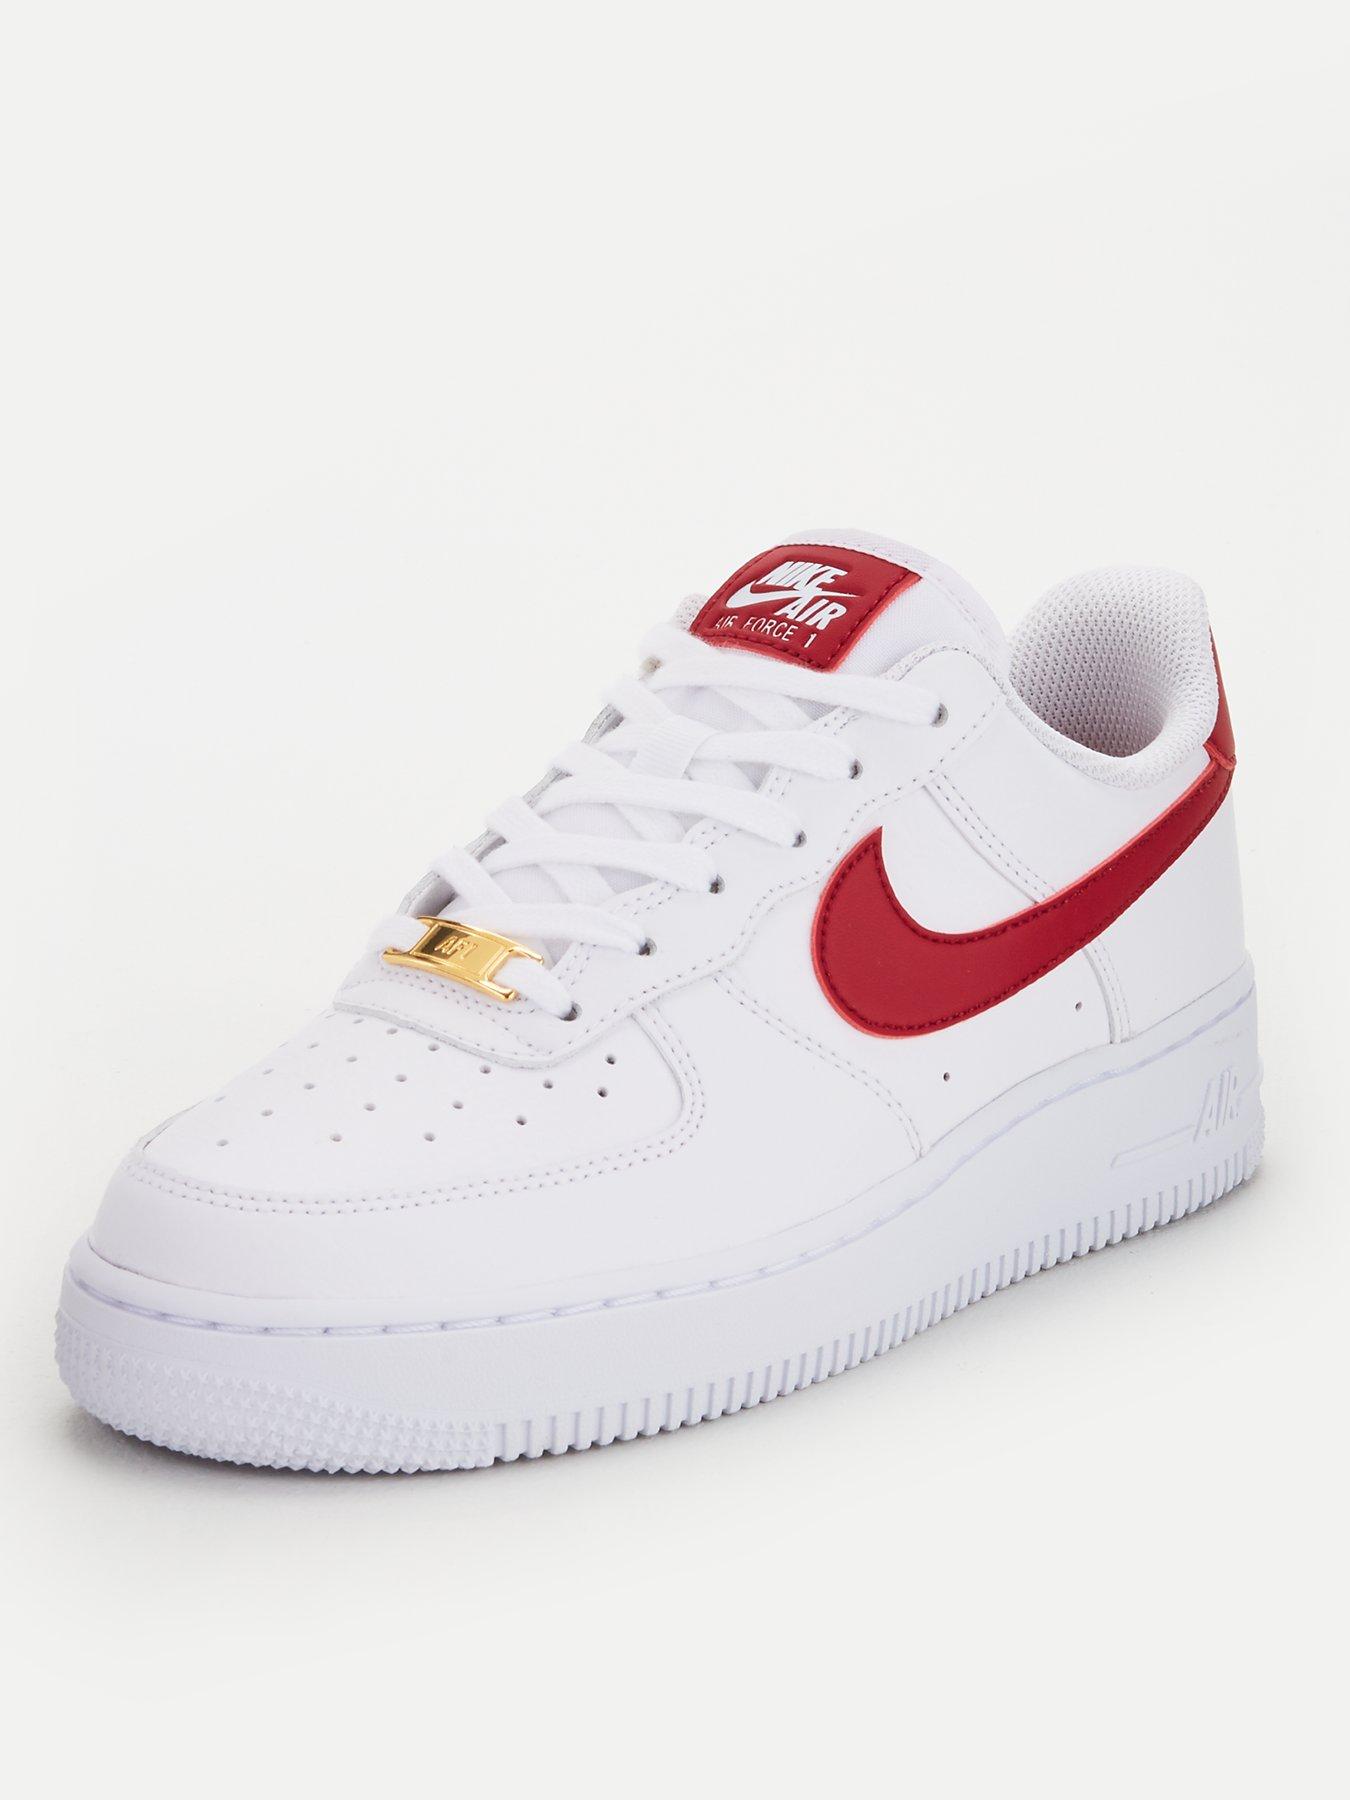 nike air force 1 size 3 white